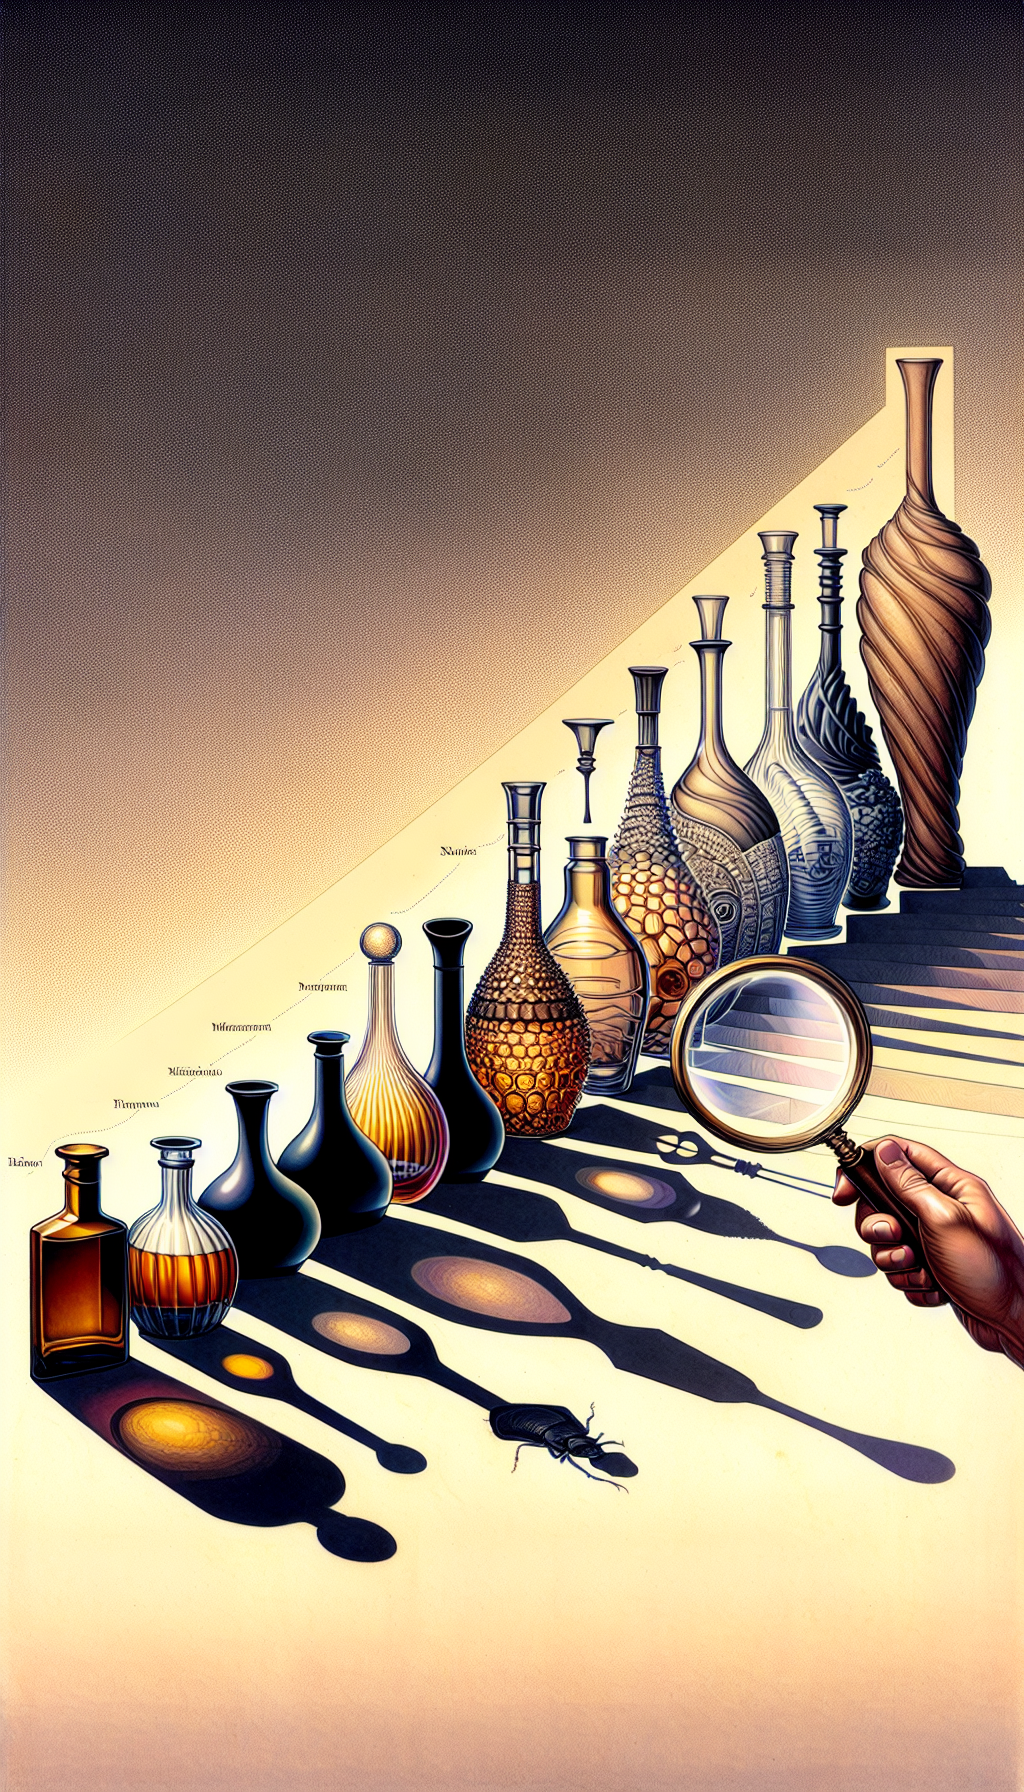 A visual timeline showcasing the transformation of decanters, where the left side begins with rudimentary, functional shapes, flowing into ornate, intricate designs on the right. Each decanter casts a shadow labeled with identifying antique traits. Styles transition from minimalist to baroque, and the final piece is a magnifying glass over a classic bottle, symbolizing the scrutiny in identification.